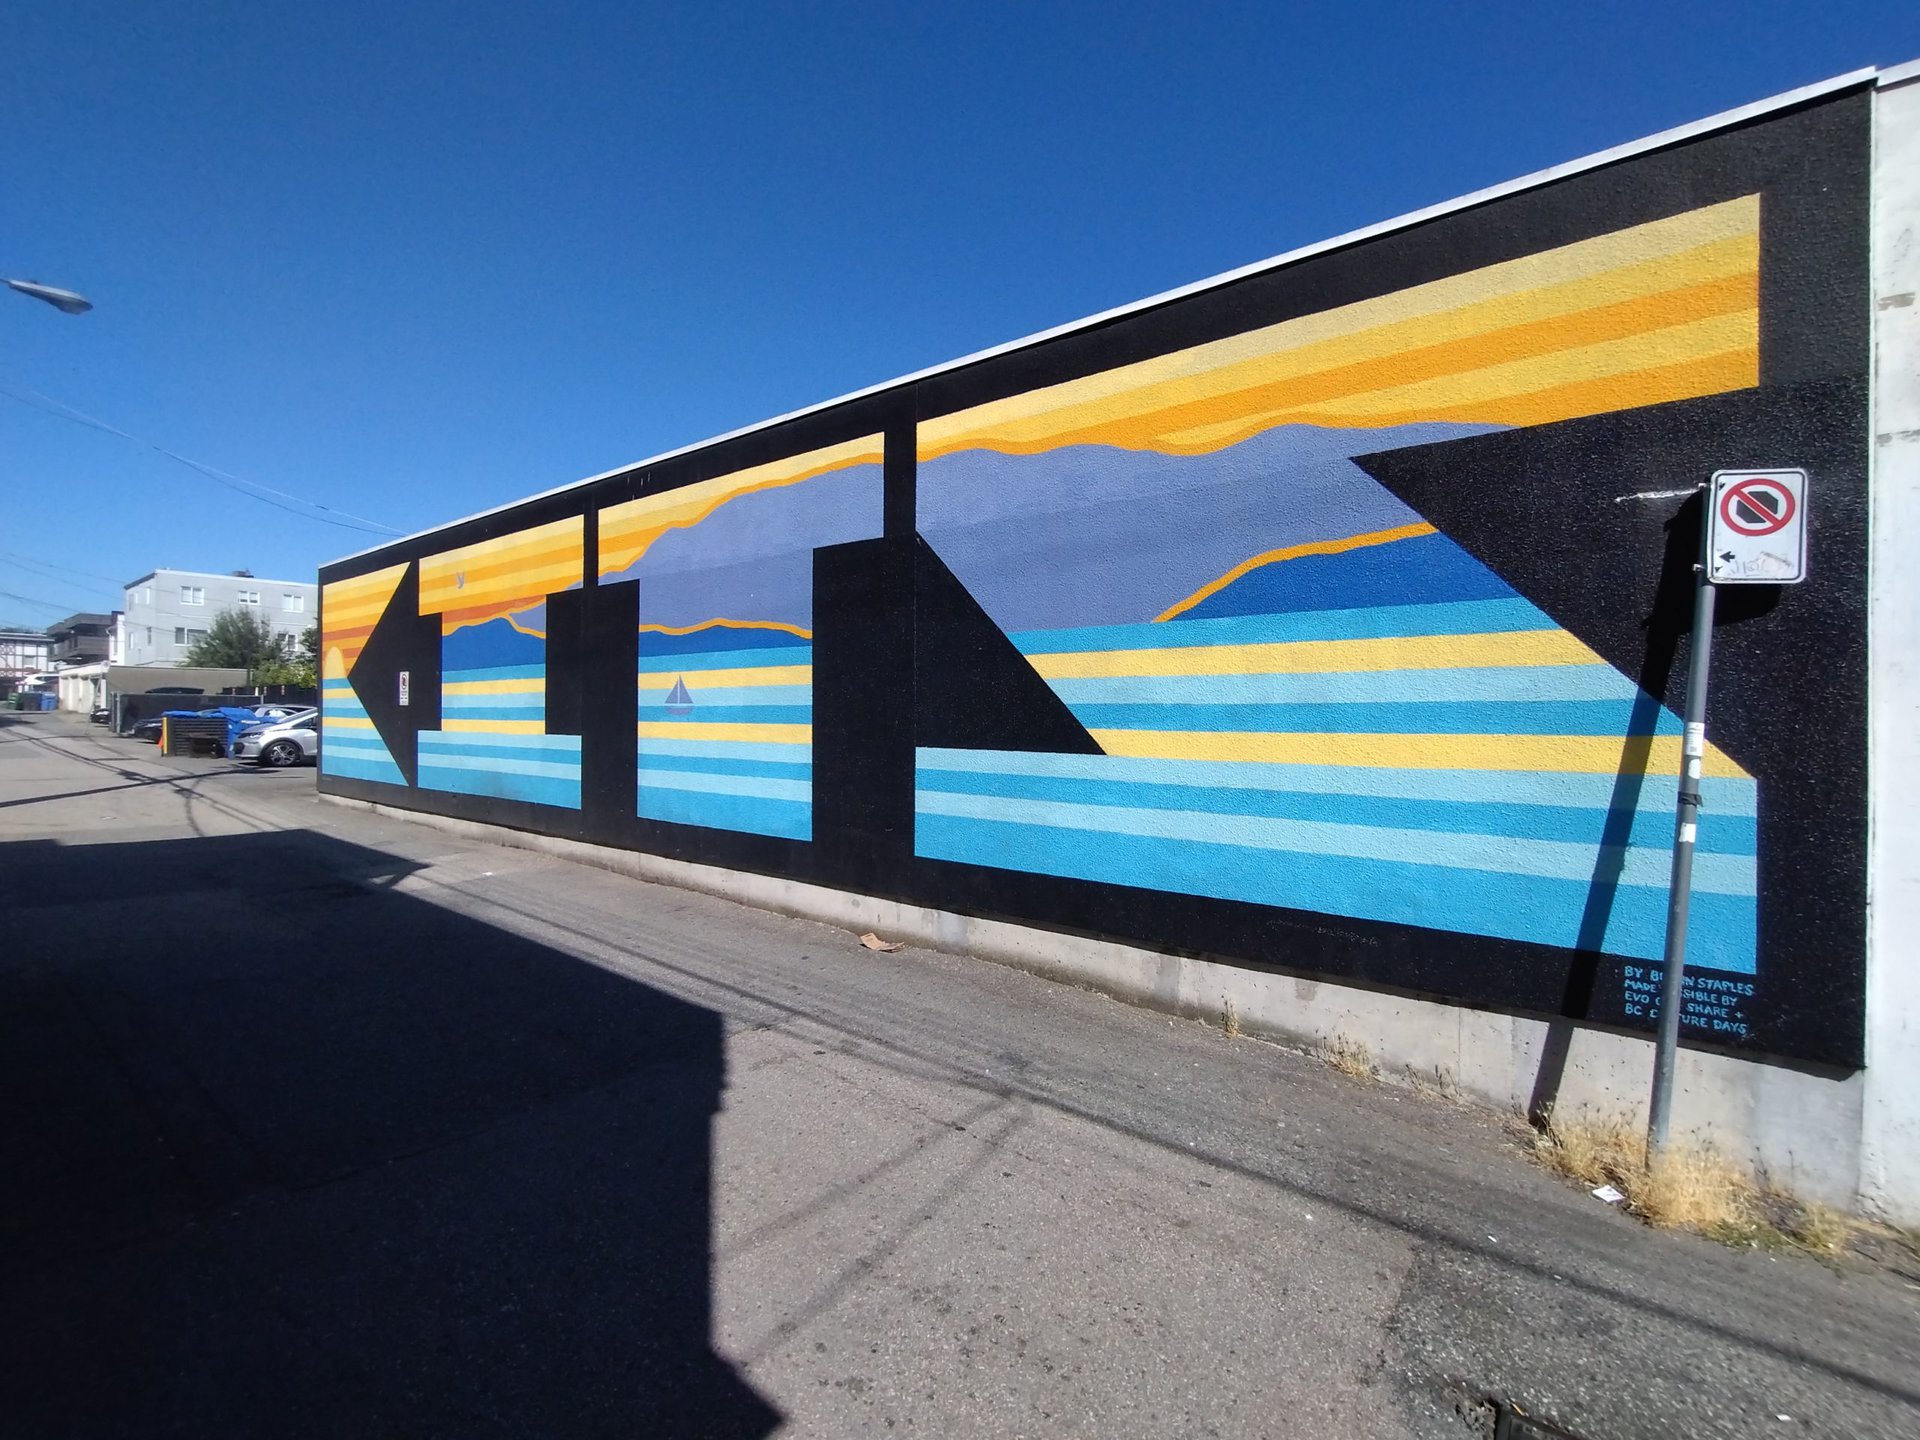 x0.6 blue and yellow mural against a blue sky